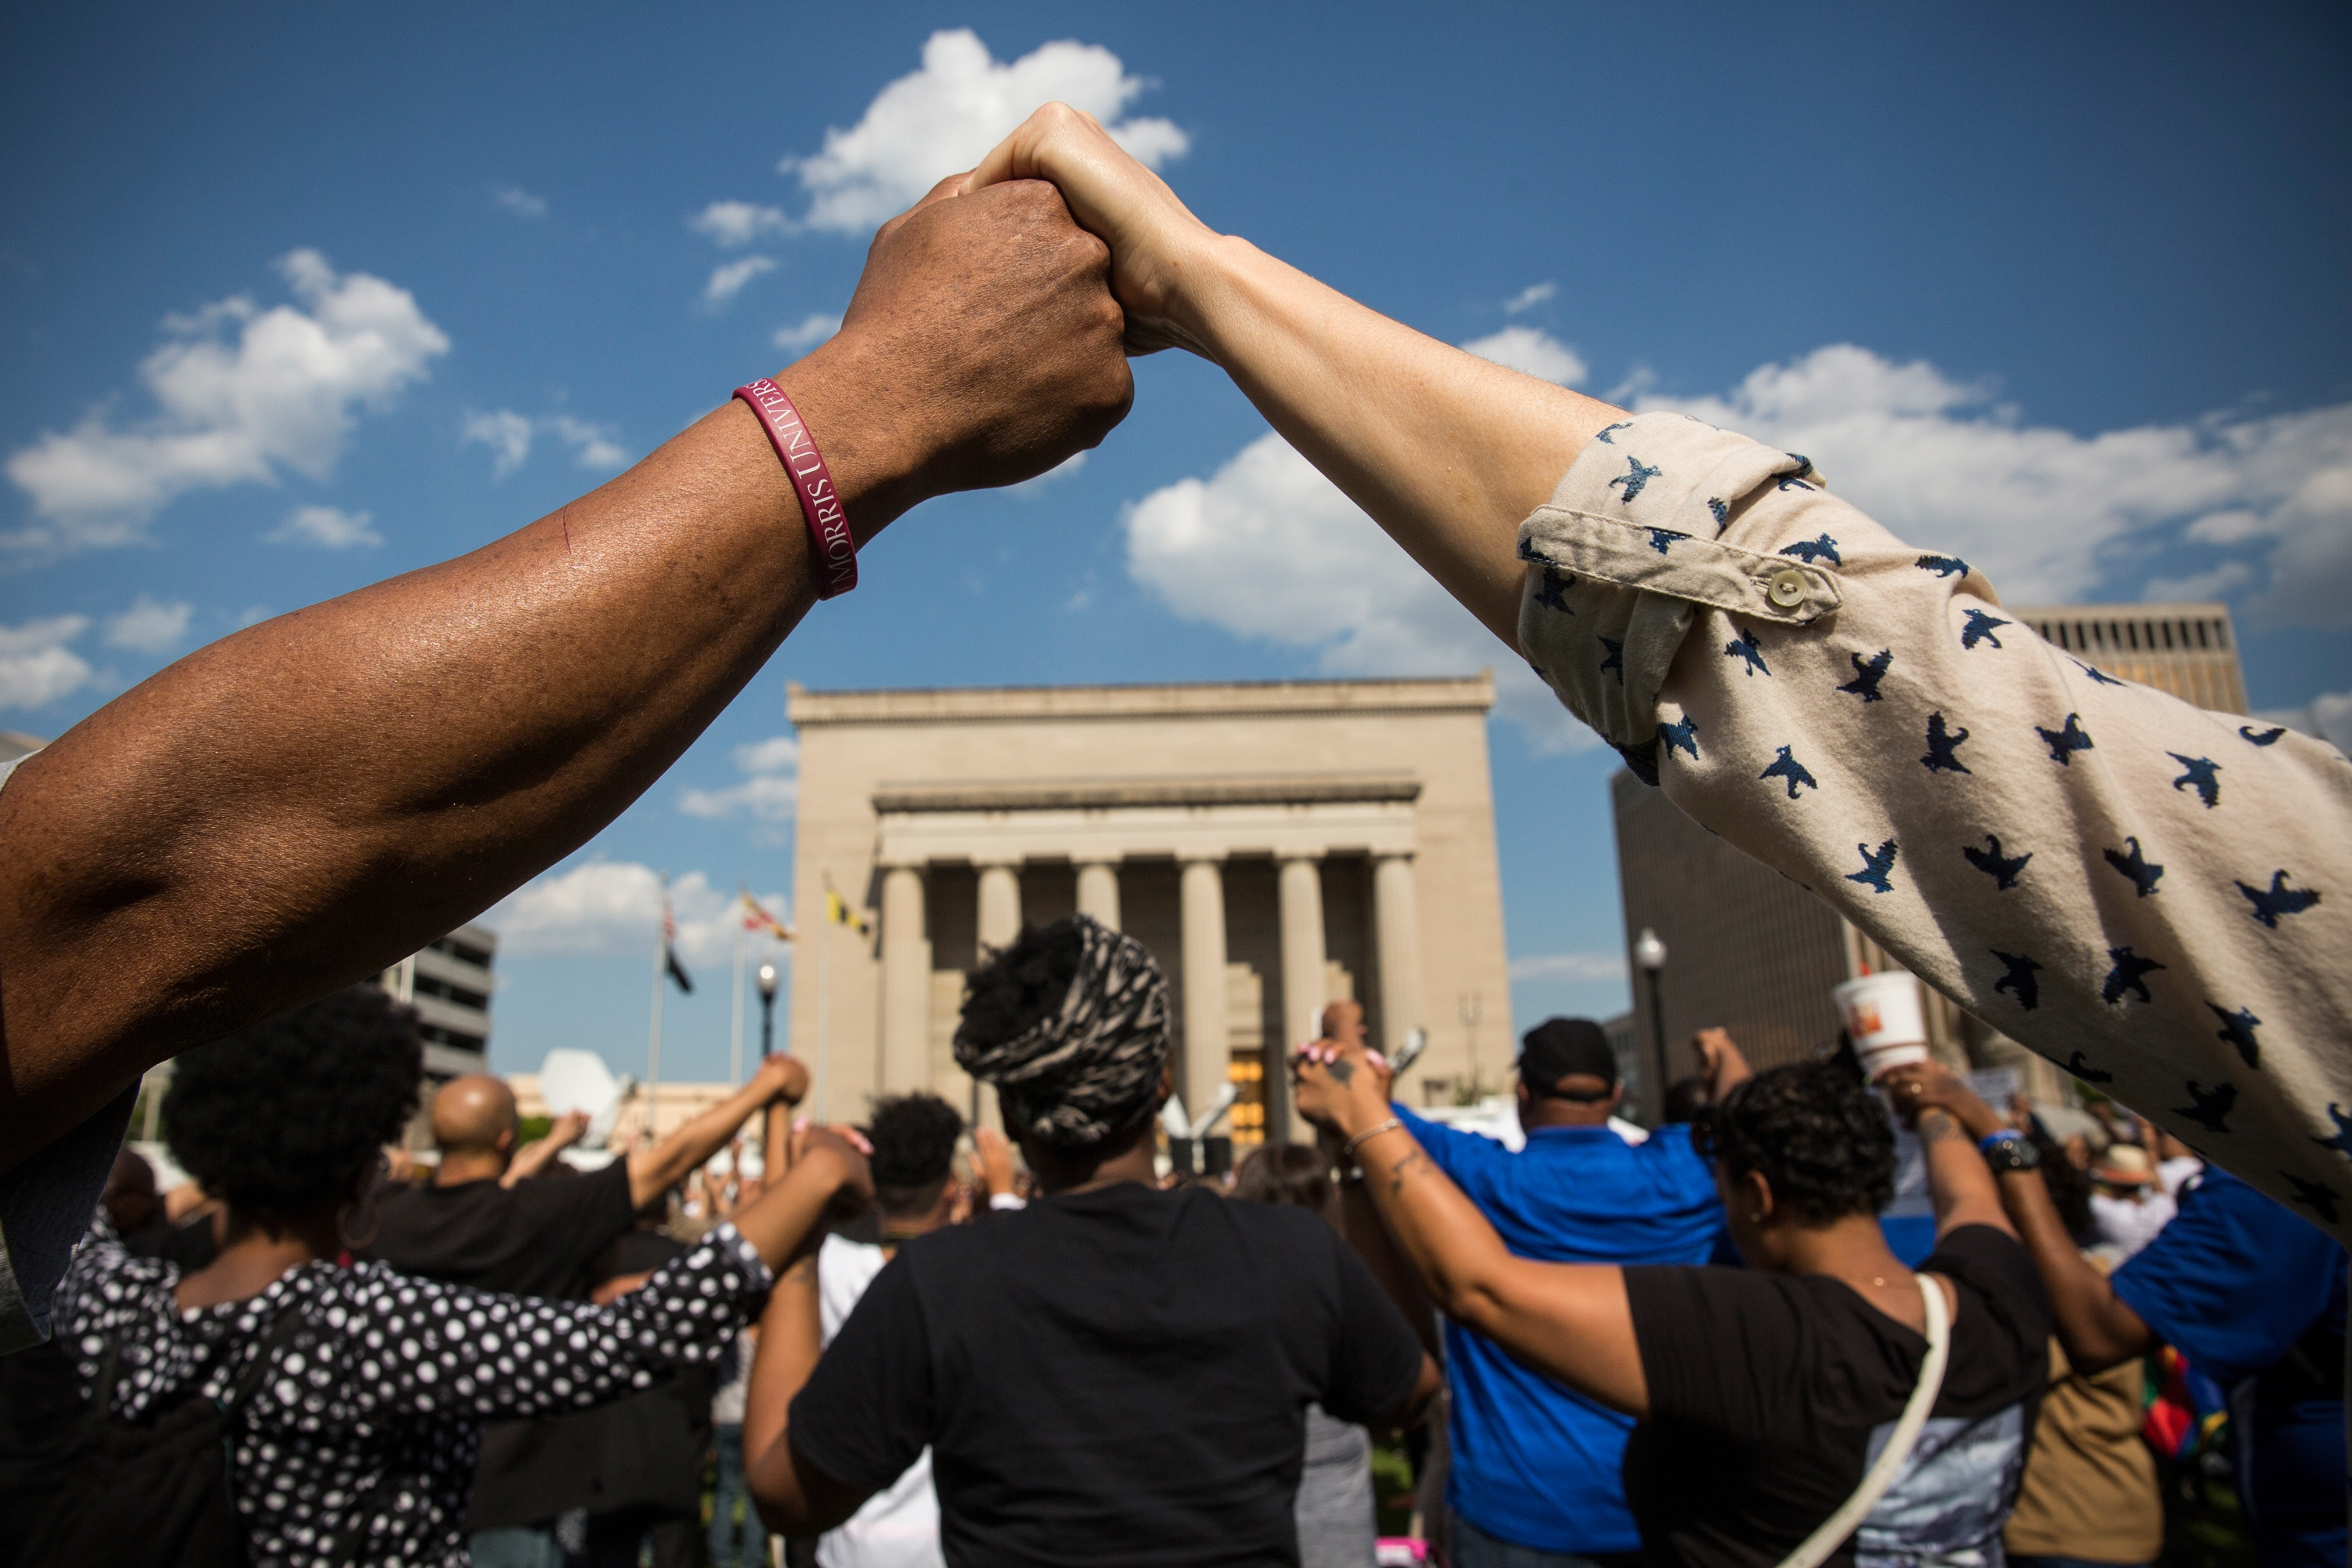 BALTIMORE, MD - MAY 03:  People hold hands during a rally lead by faith leaders in front of city hall calling for justice in response to the death of Freddie Gray on May 3, 2015 in Baltimore, Maryland. Gray later died in custody; the Maryland state attorney announced on Friday that charges would be brought against the six police officers who arrested Gray.  (Photo by Andrew Burton/Getty Images)